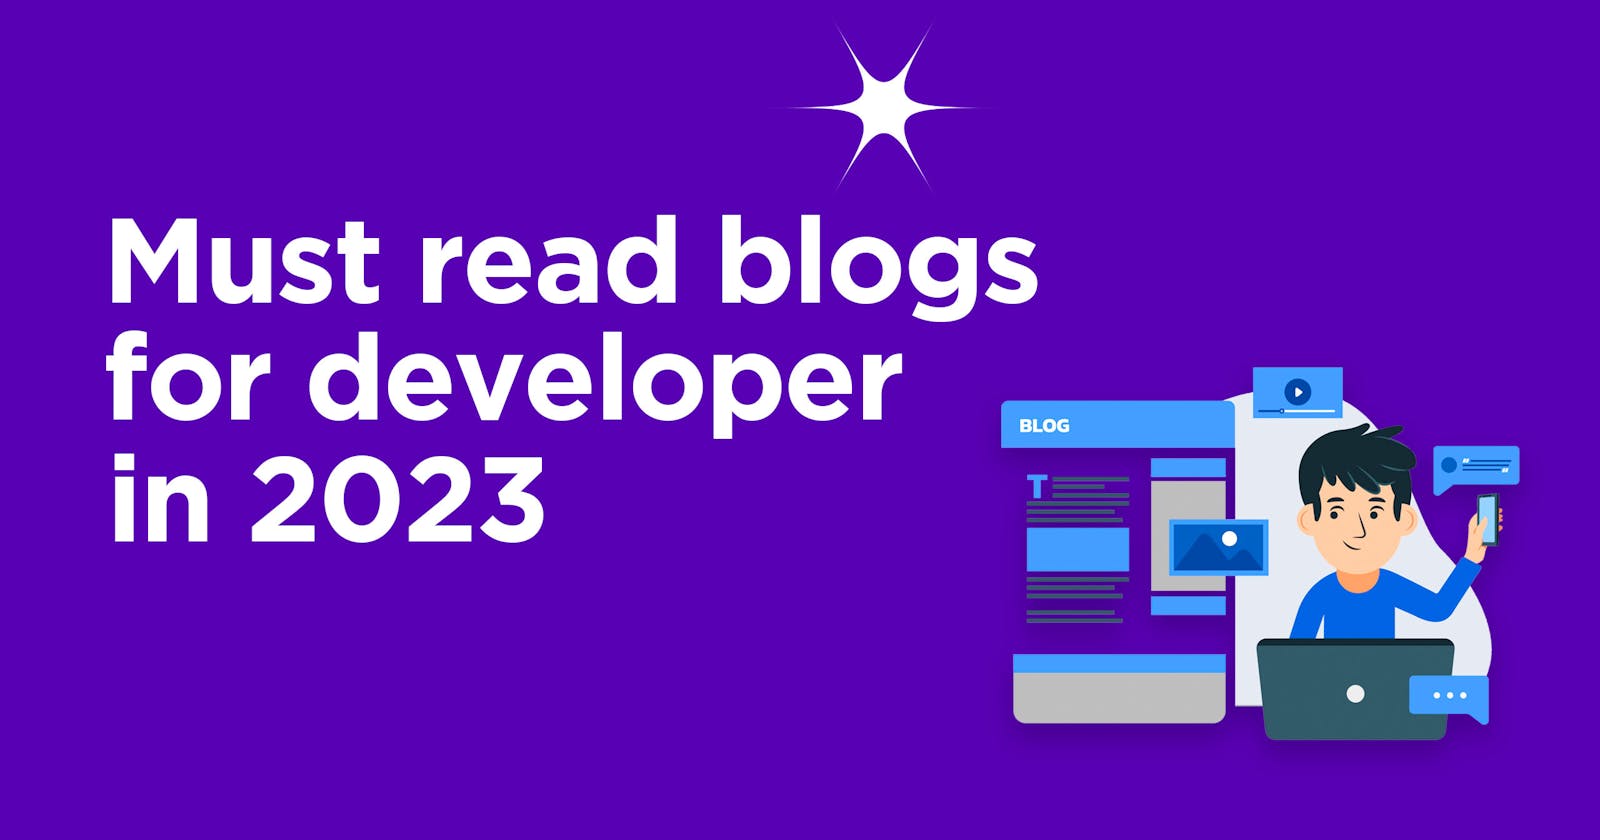 5 must-read blogs for developer: boost your development knowledge